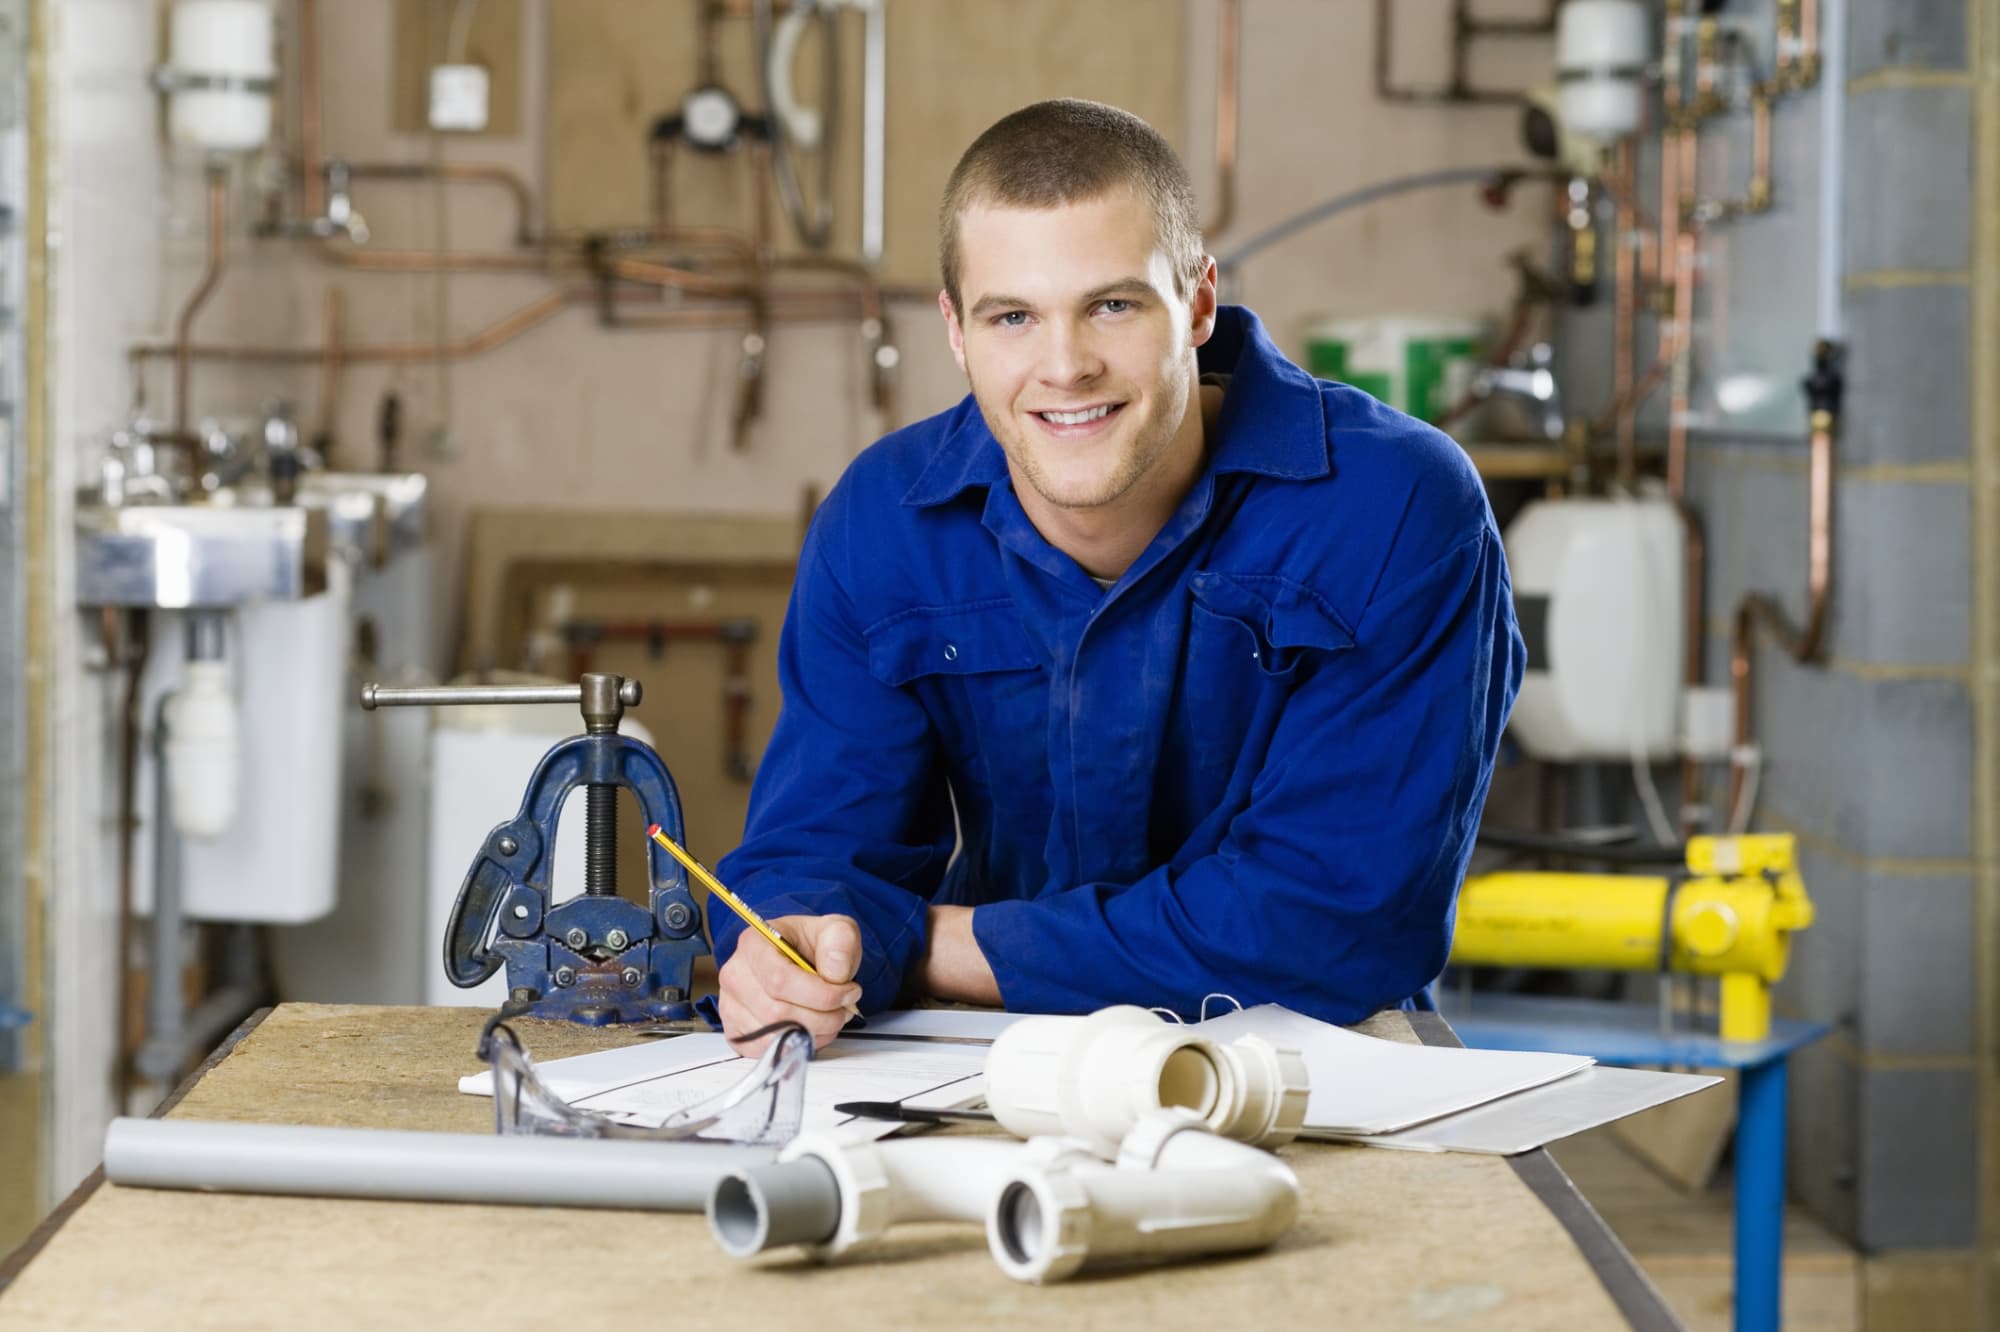 Plumber taking notes on desk with pieces of pipes